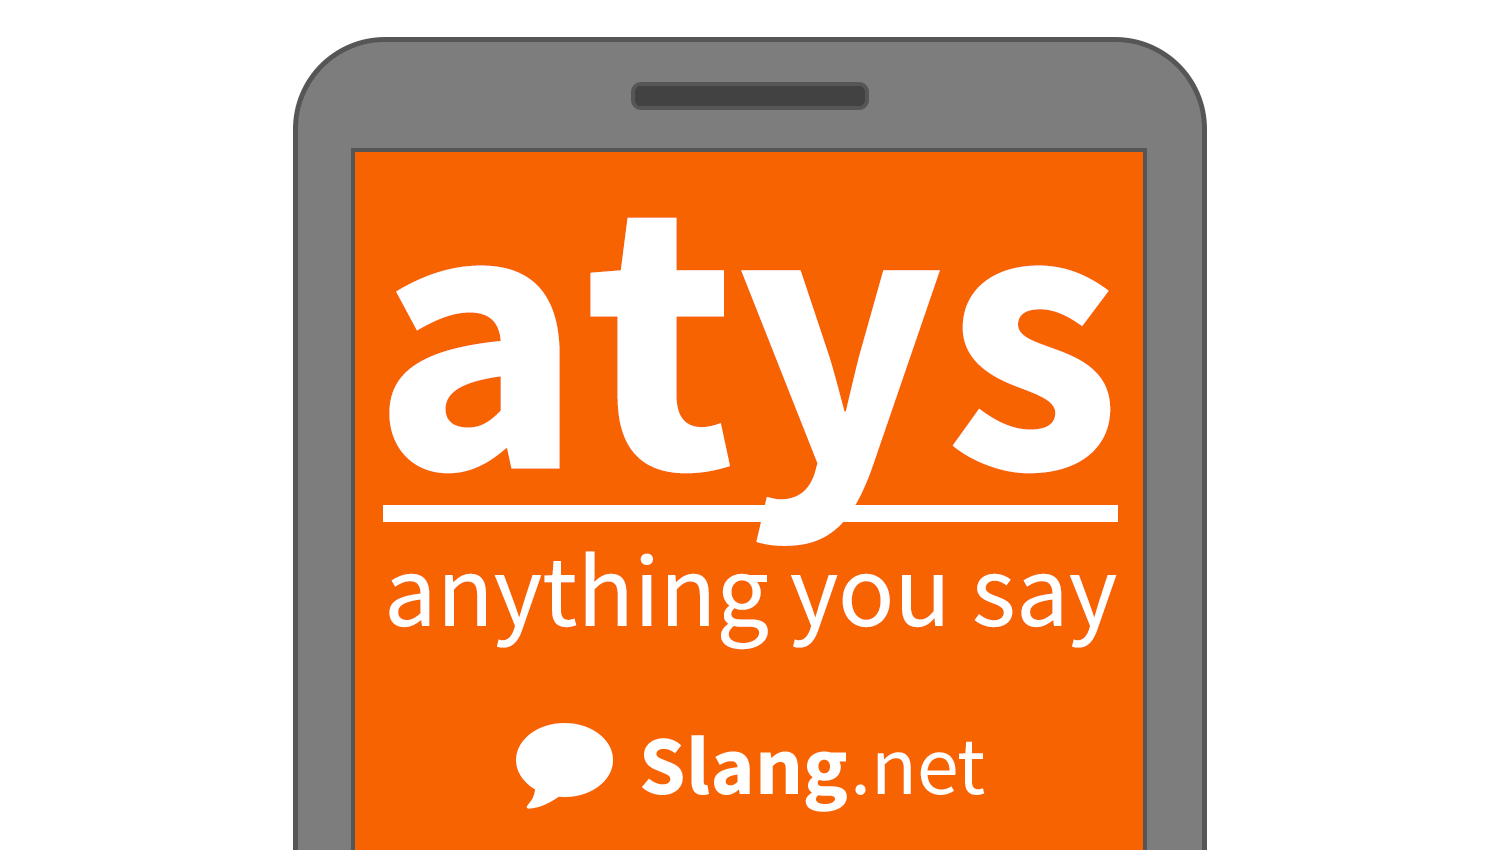 You might see &quot;atys&quot; in messages and online to mean &quot;anything you say&quot;